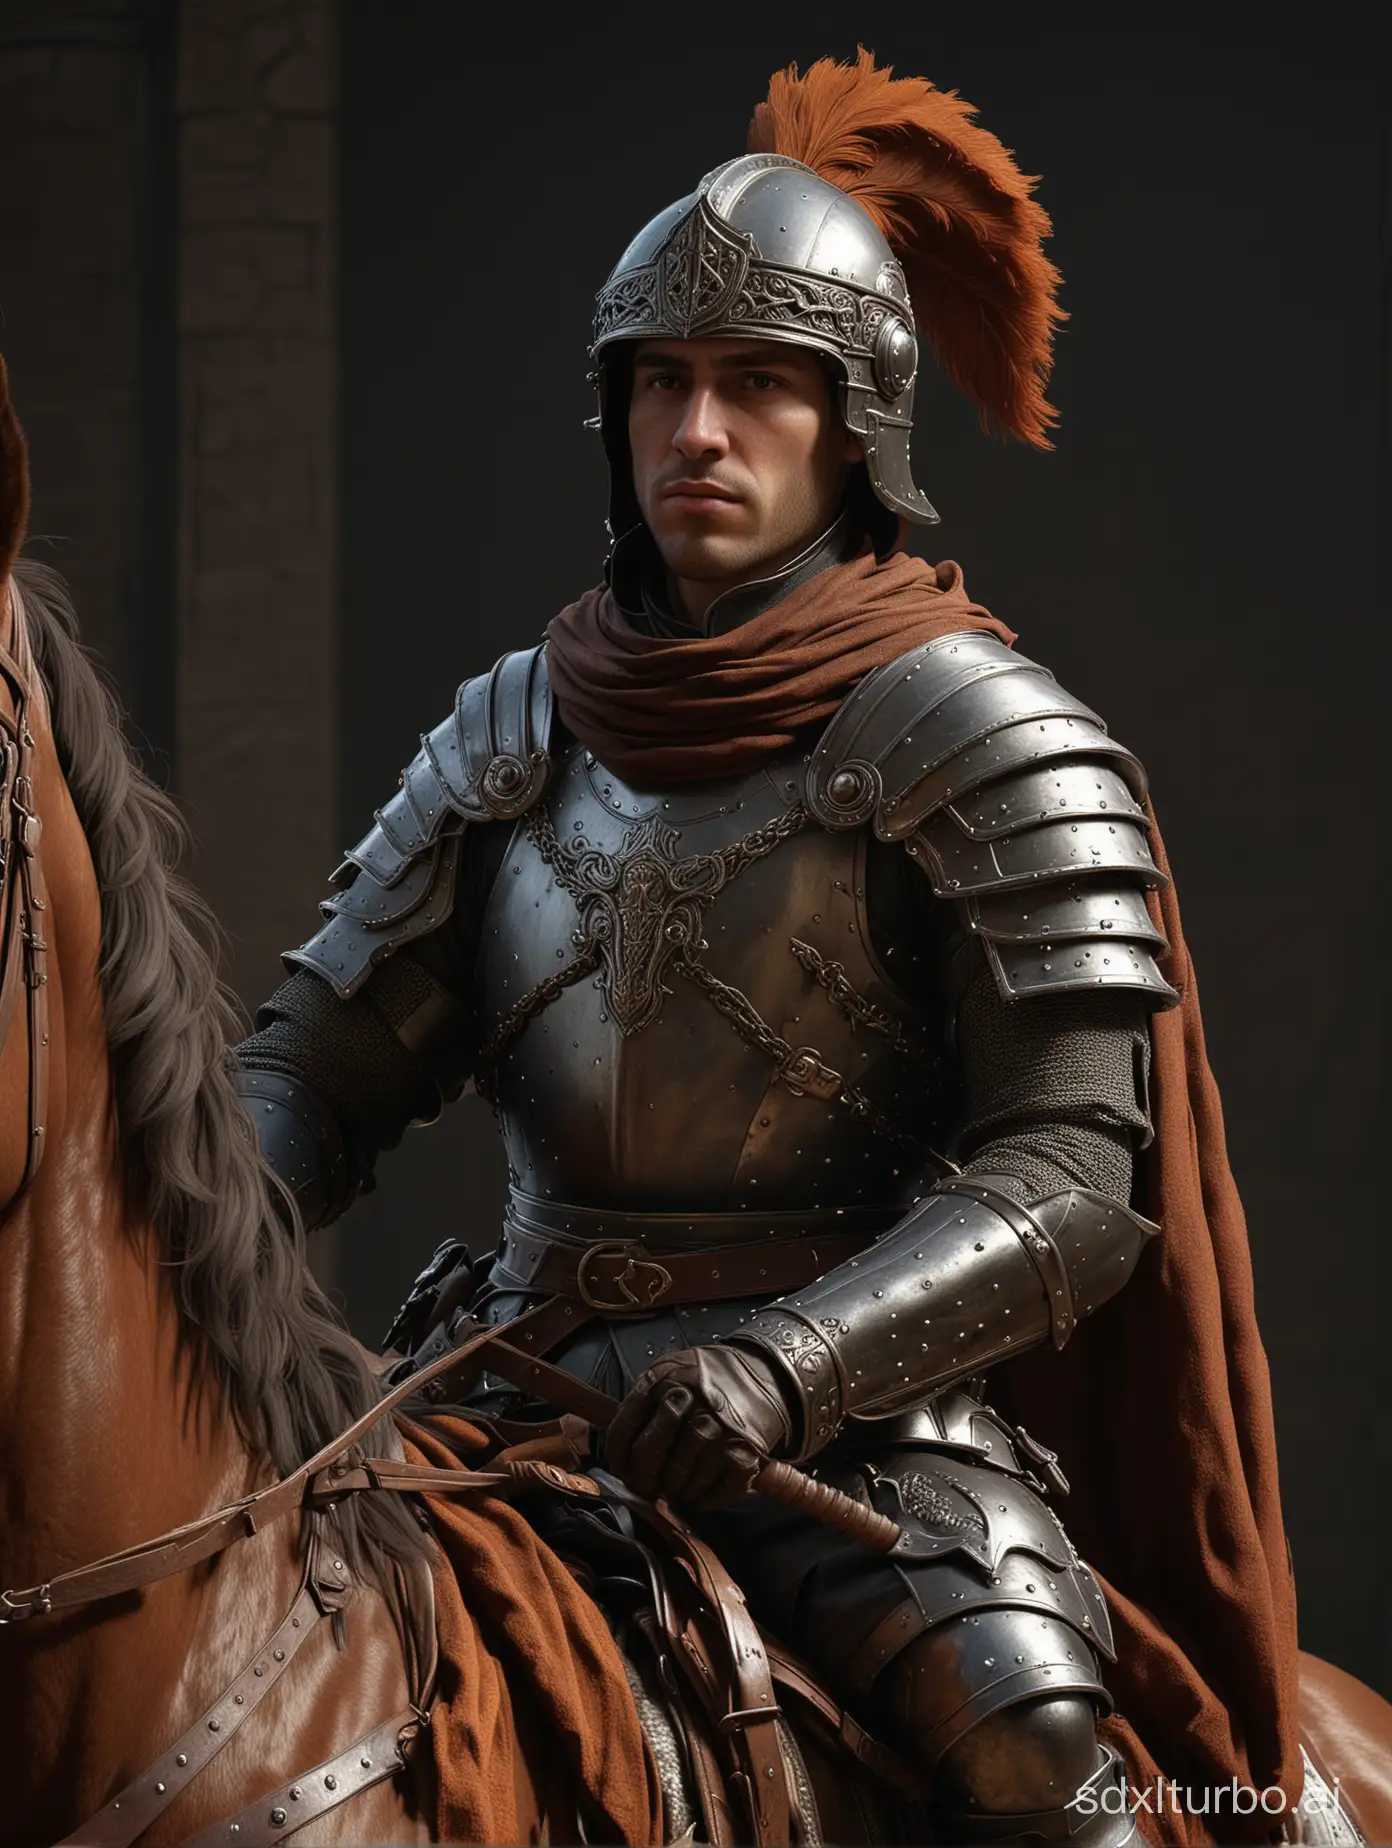 Handsome-Knight-in-Armor-Riding-Brown-Horse-Photorealistic-Concept-Art